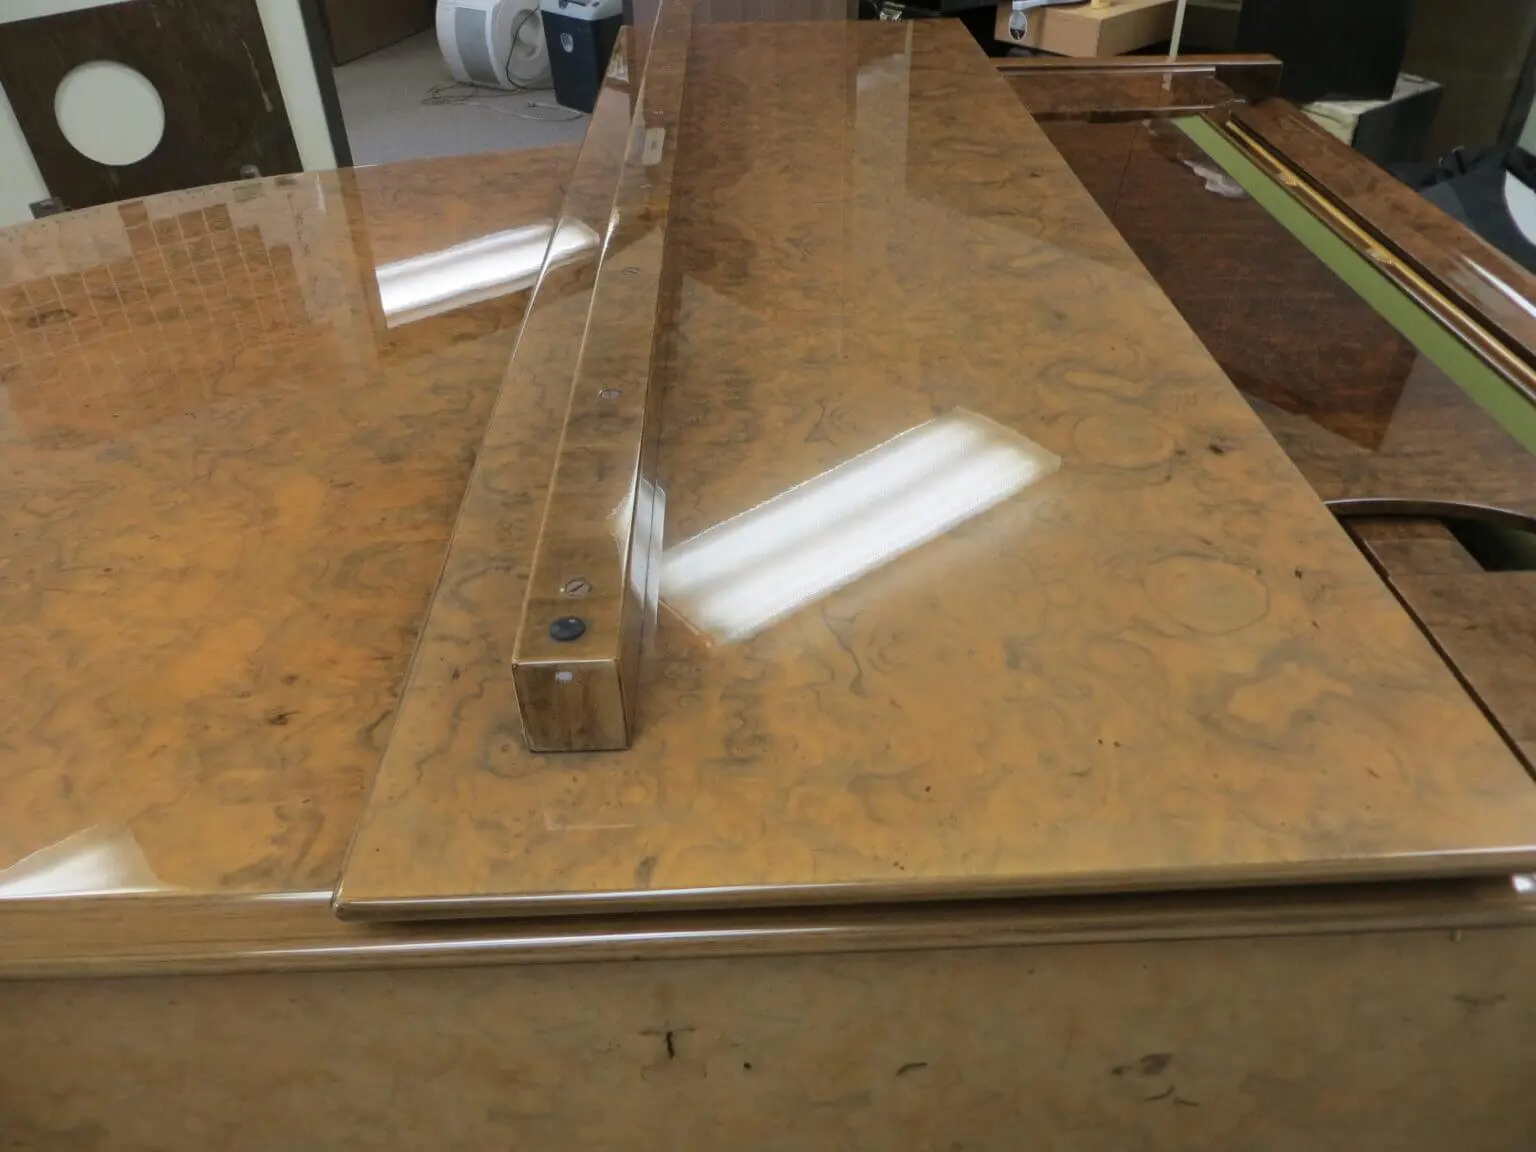 A marble table with a ruler on top of it.